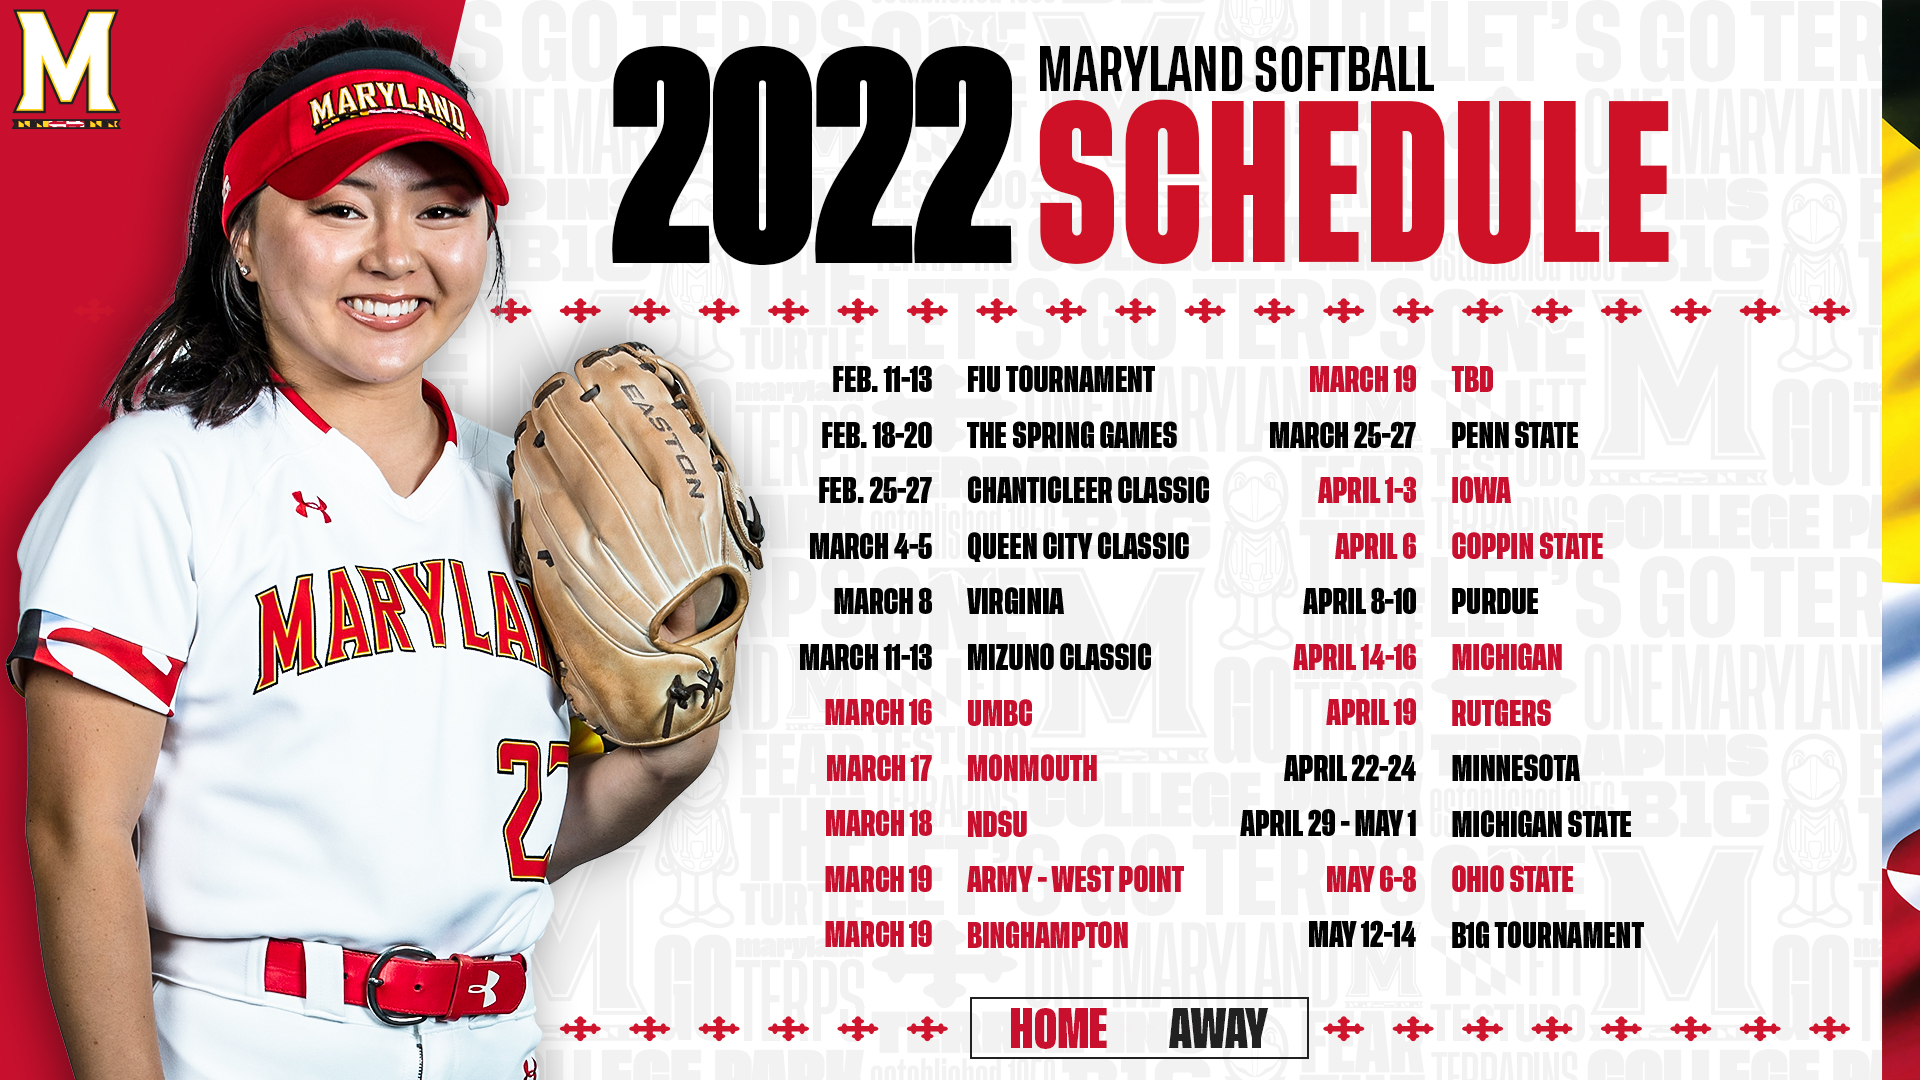 Michigan Softball Schedule 2022 Maryland Softball On Twitter: "𝒯𝒽𝑒 𝓂𝑜𝓂𝑒𝓃𝓉 𝓎𝑜𝓊'𝓋𝑒 𝒷𝑒𝑒𝓃  𝓌𝒶𝒾𝓉𝒾𝓃𝑔 𝒻𝑜𝓇... The 2022 Schedule Has Arrived!! For A Full  Breakdown Head Here ⬇️ Https://T.co/Nkpstoykis Https://T.co/Fvjvajkxmu" /  Twitter